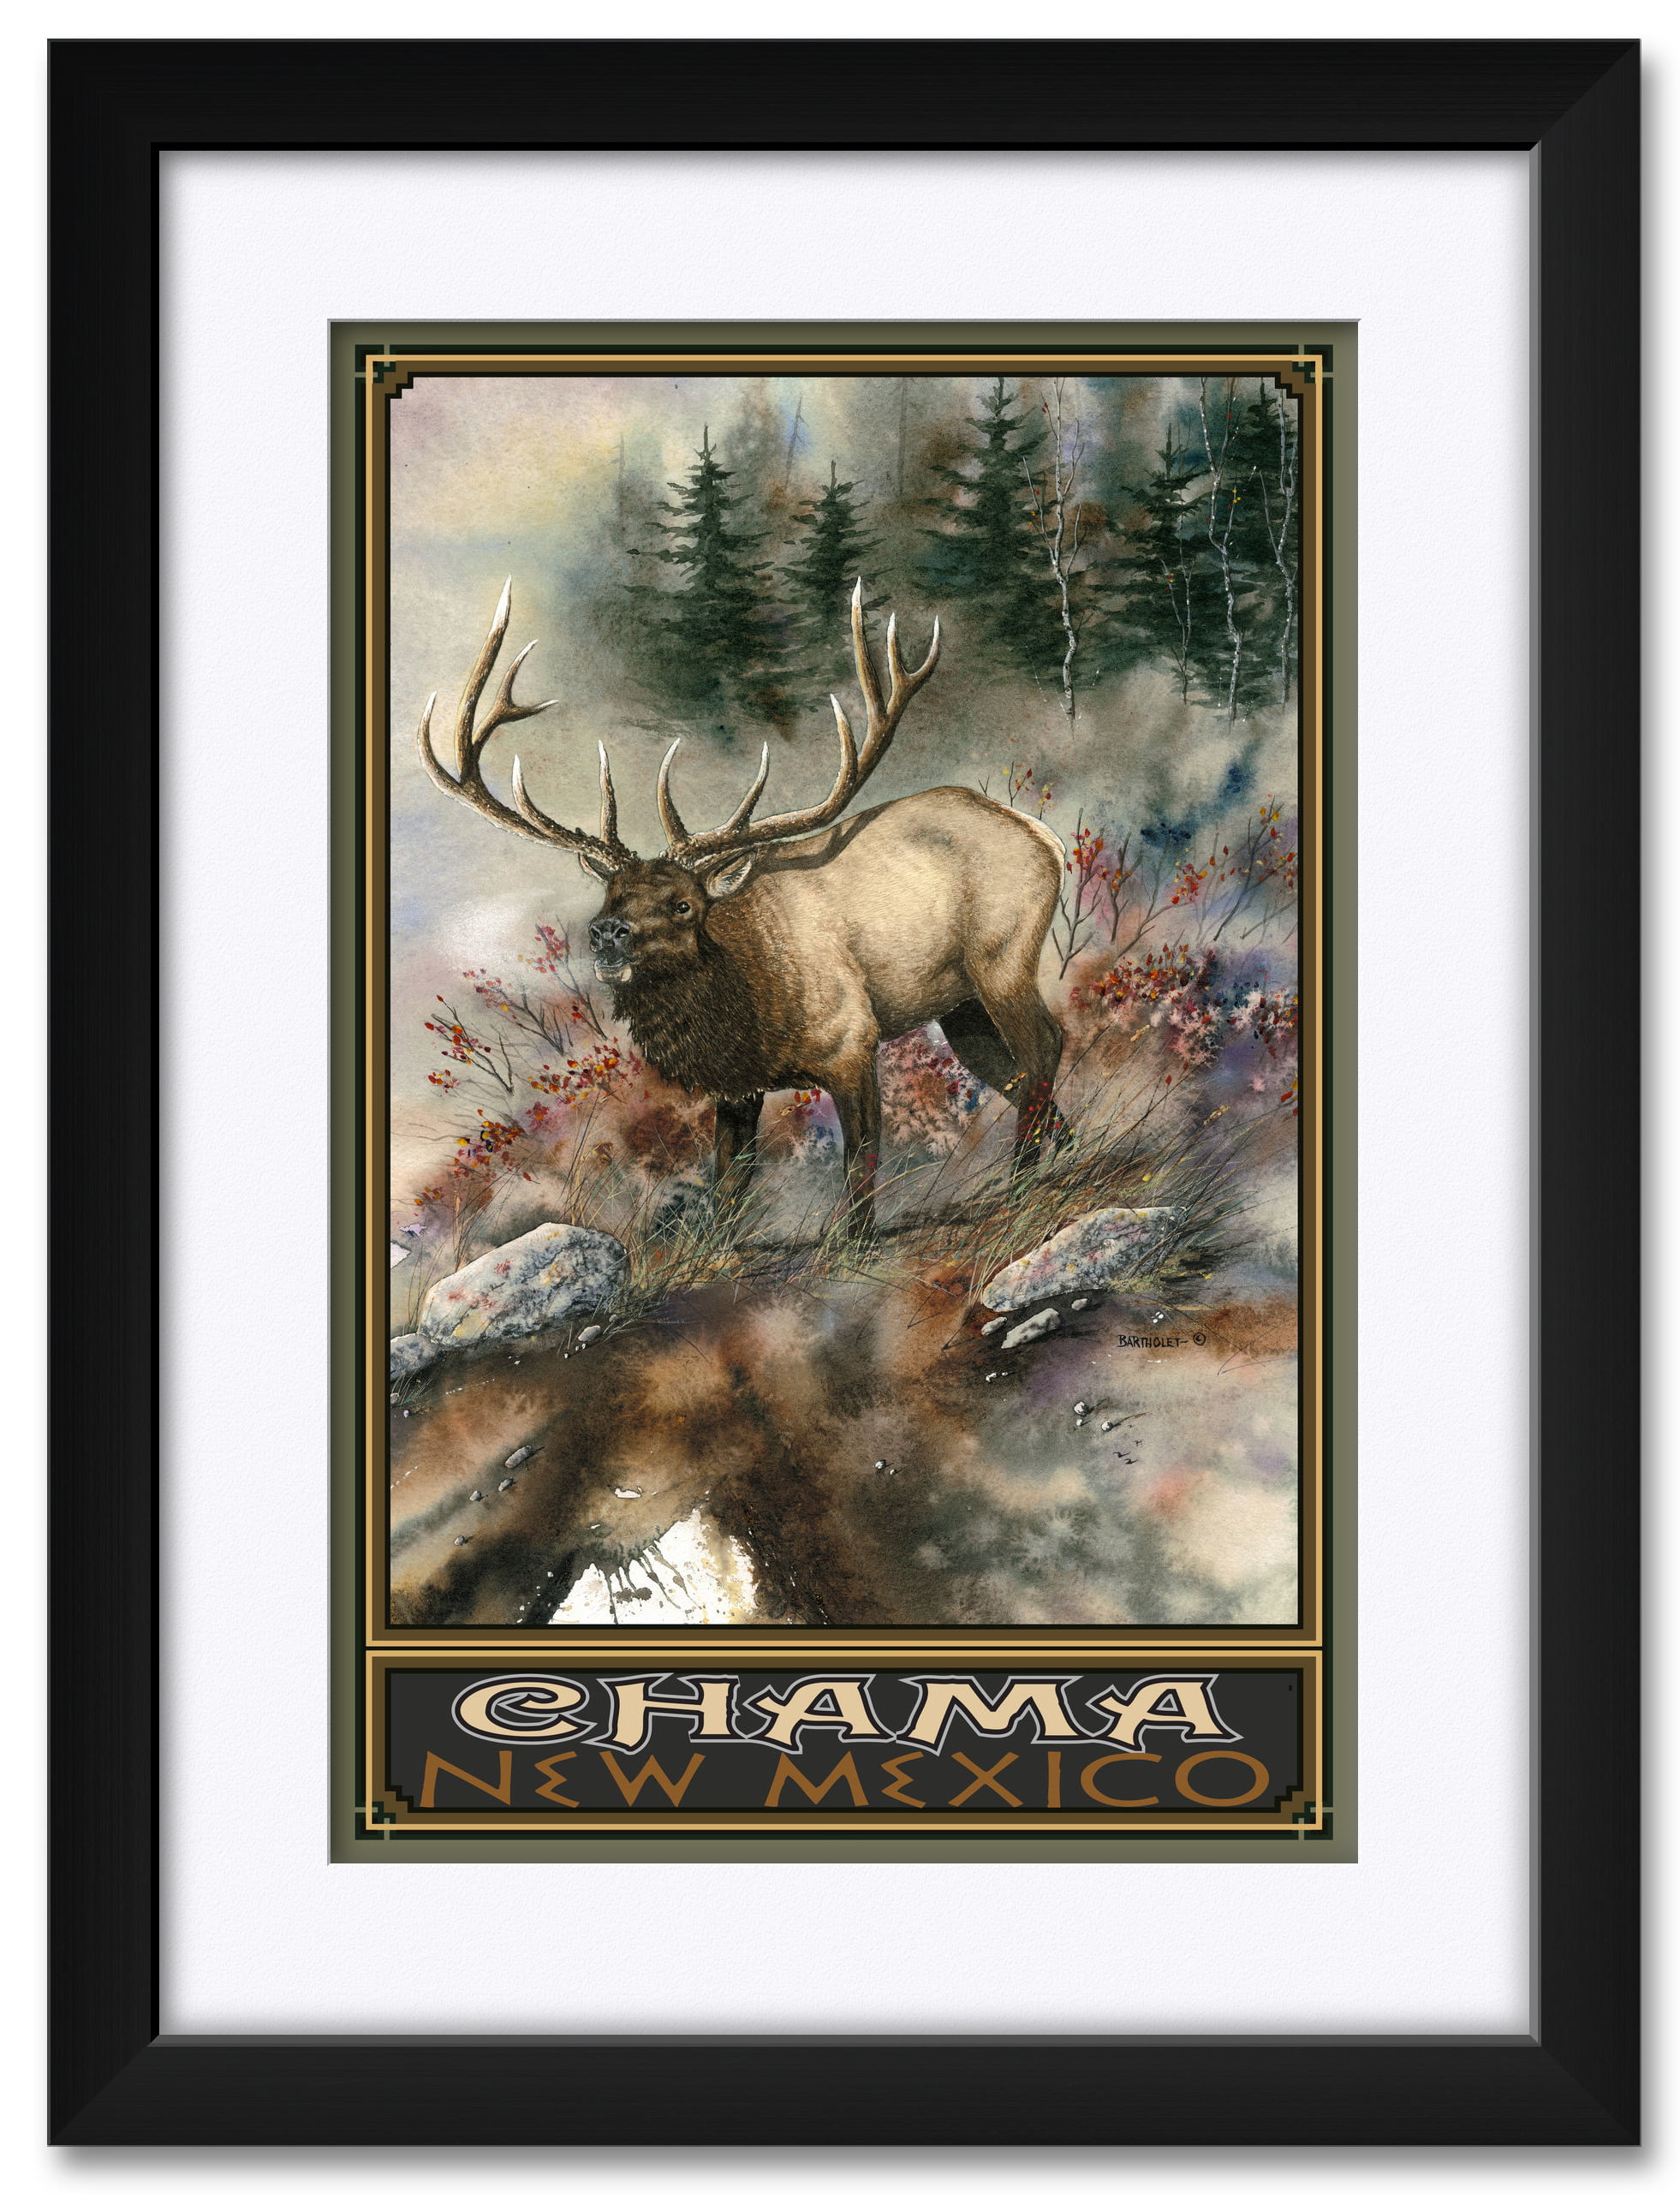 Chama New Mexico Framed & Matted Art Print by Dave Bartholet. Print Size 12" x 18" Framed Art